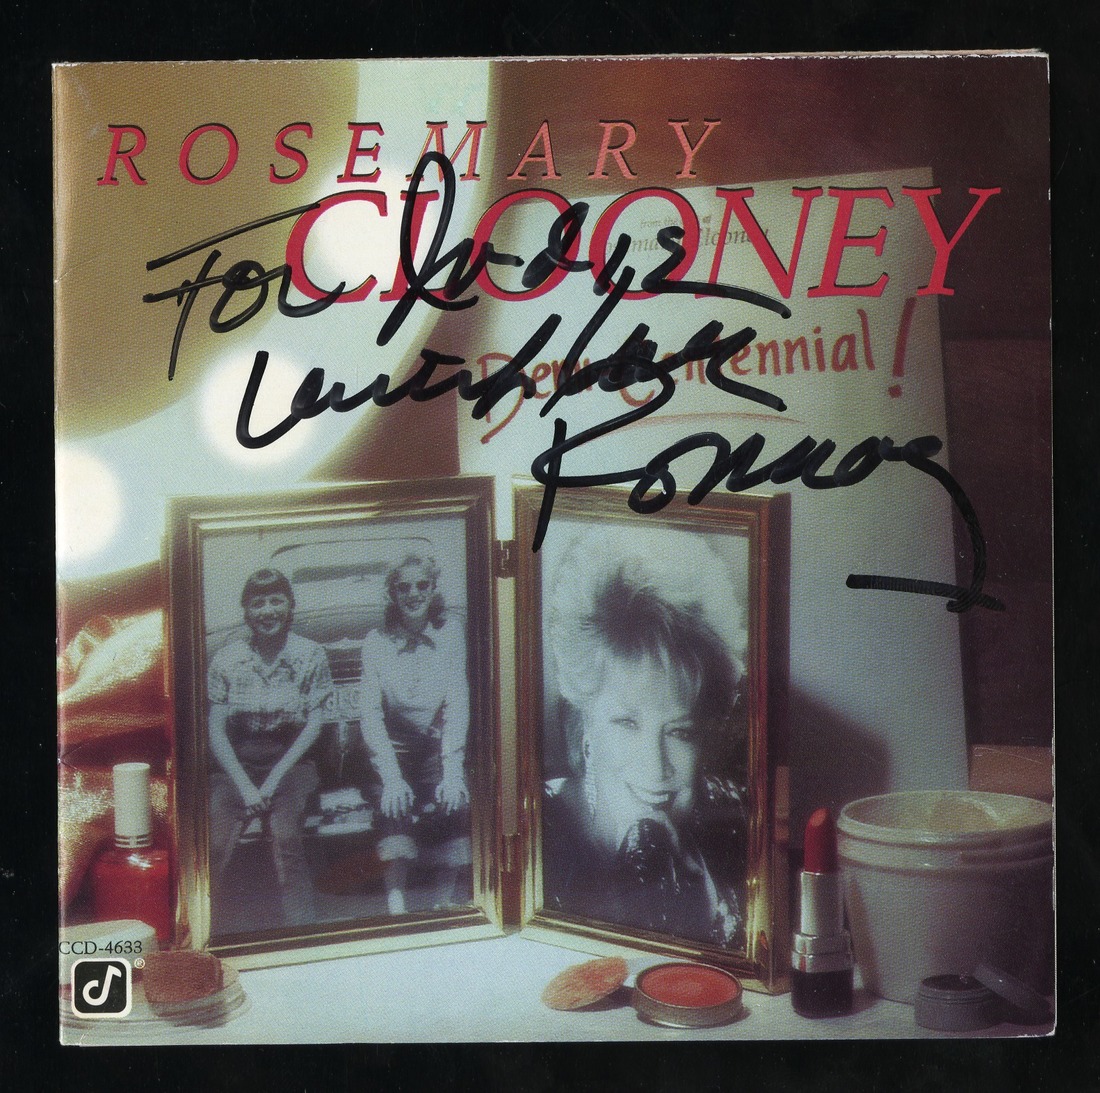 Female Stars: Rosemary Clooney. Cabaret singer, jazz vocalist and actress. Autographed CD insert. - Image 2 of 5